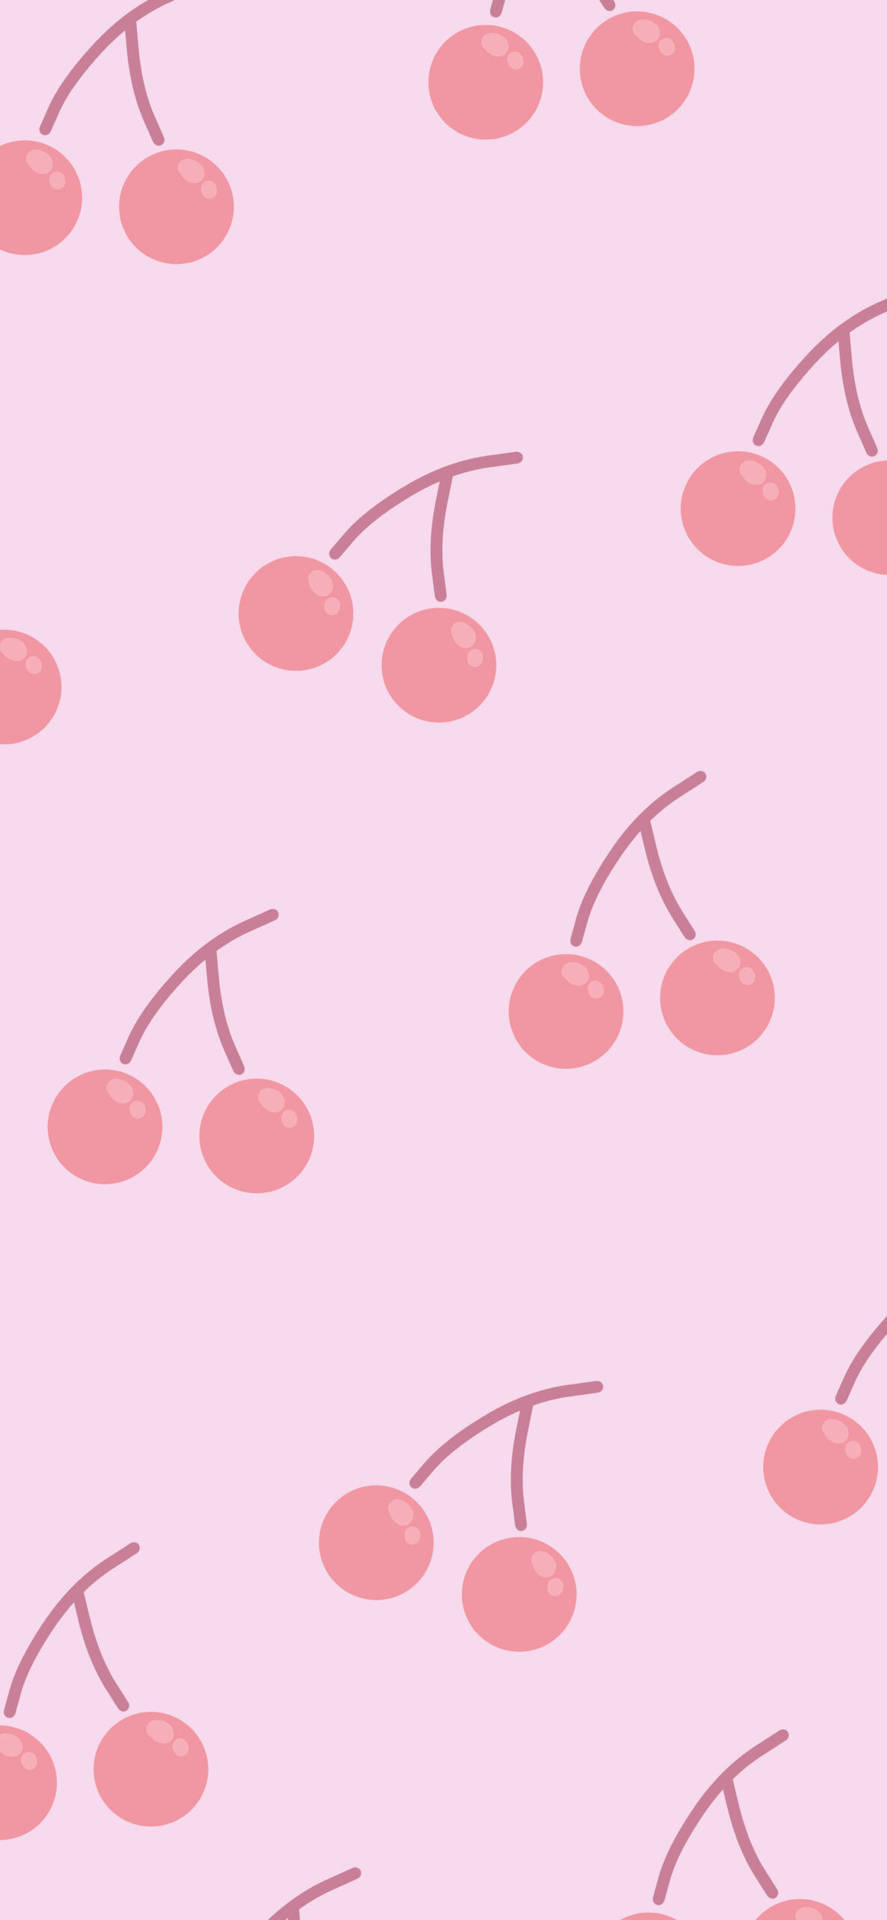 Look how amazingly vibrant the cute cherry aesthetic is! Wallpaper